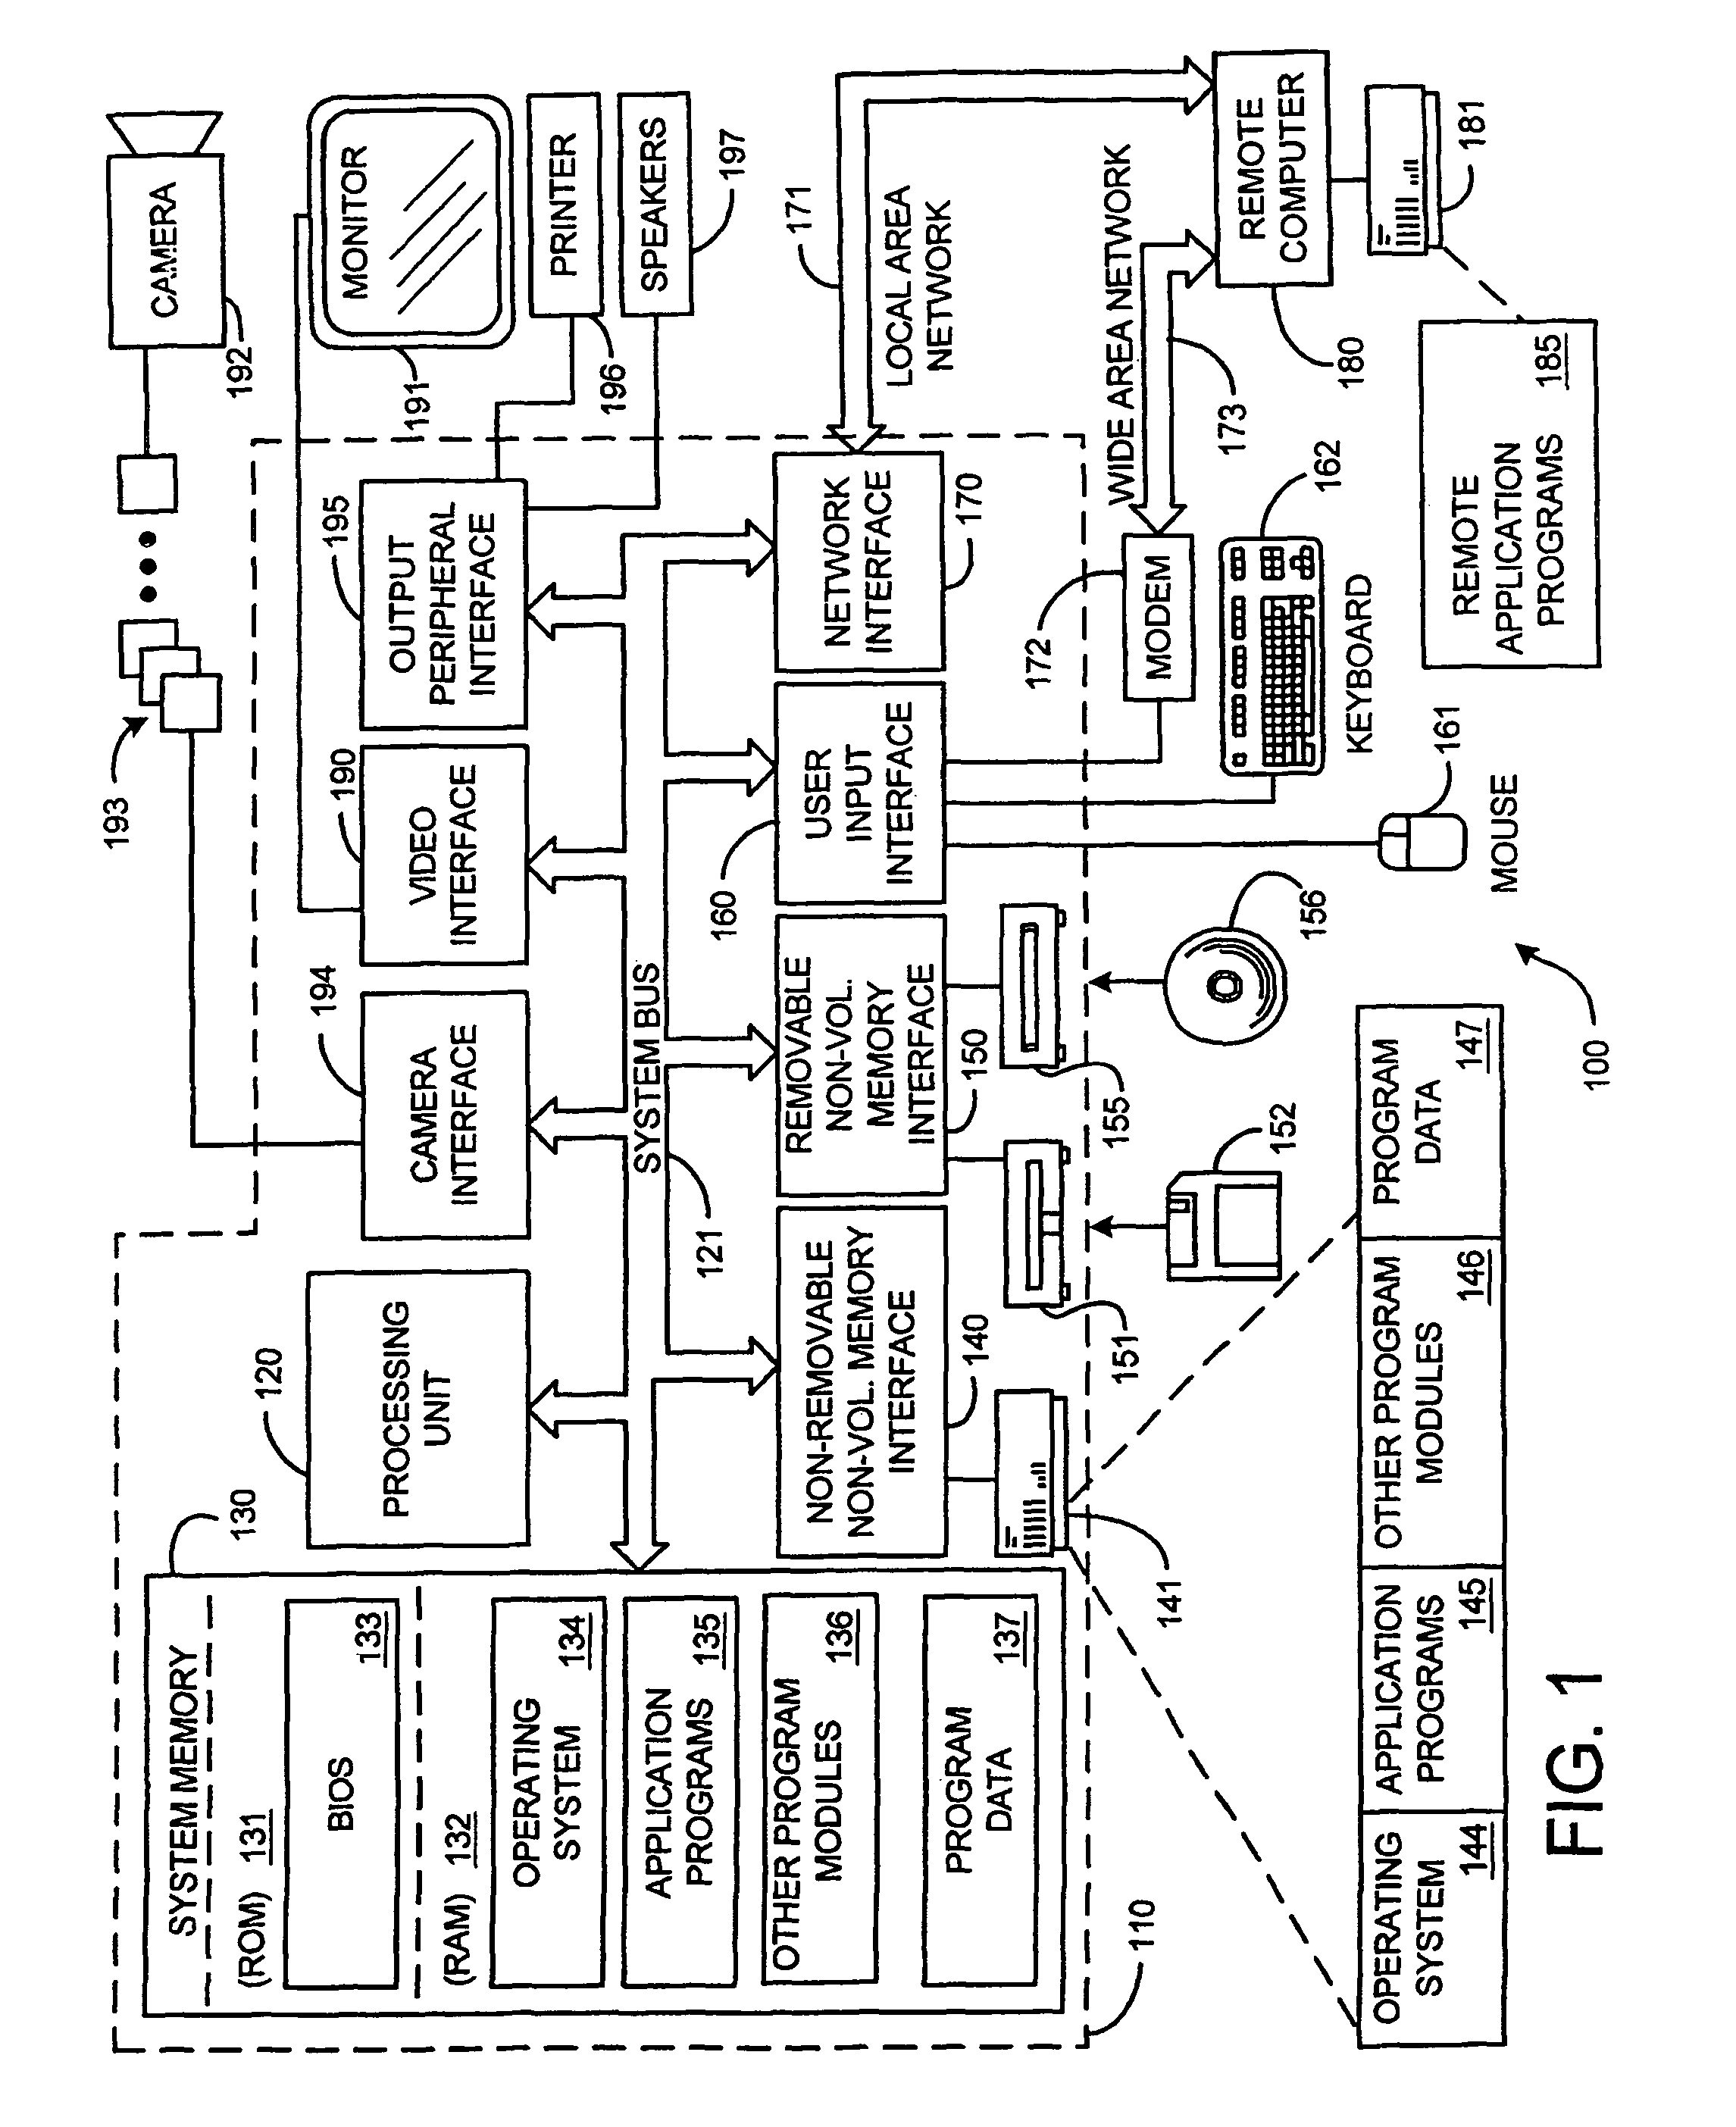 System and method for camera calibration and images stitching